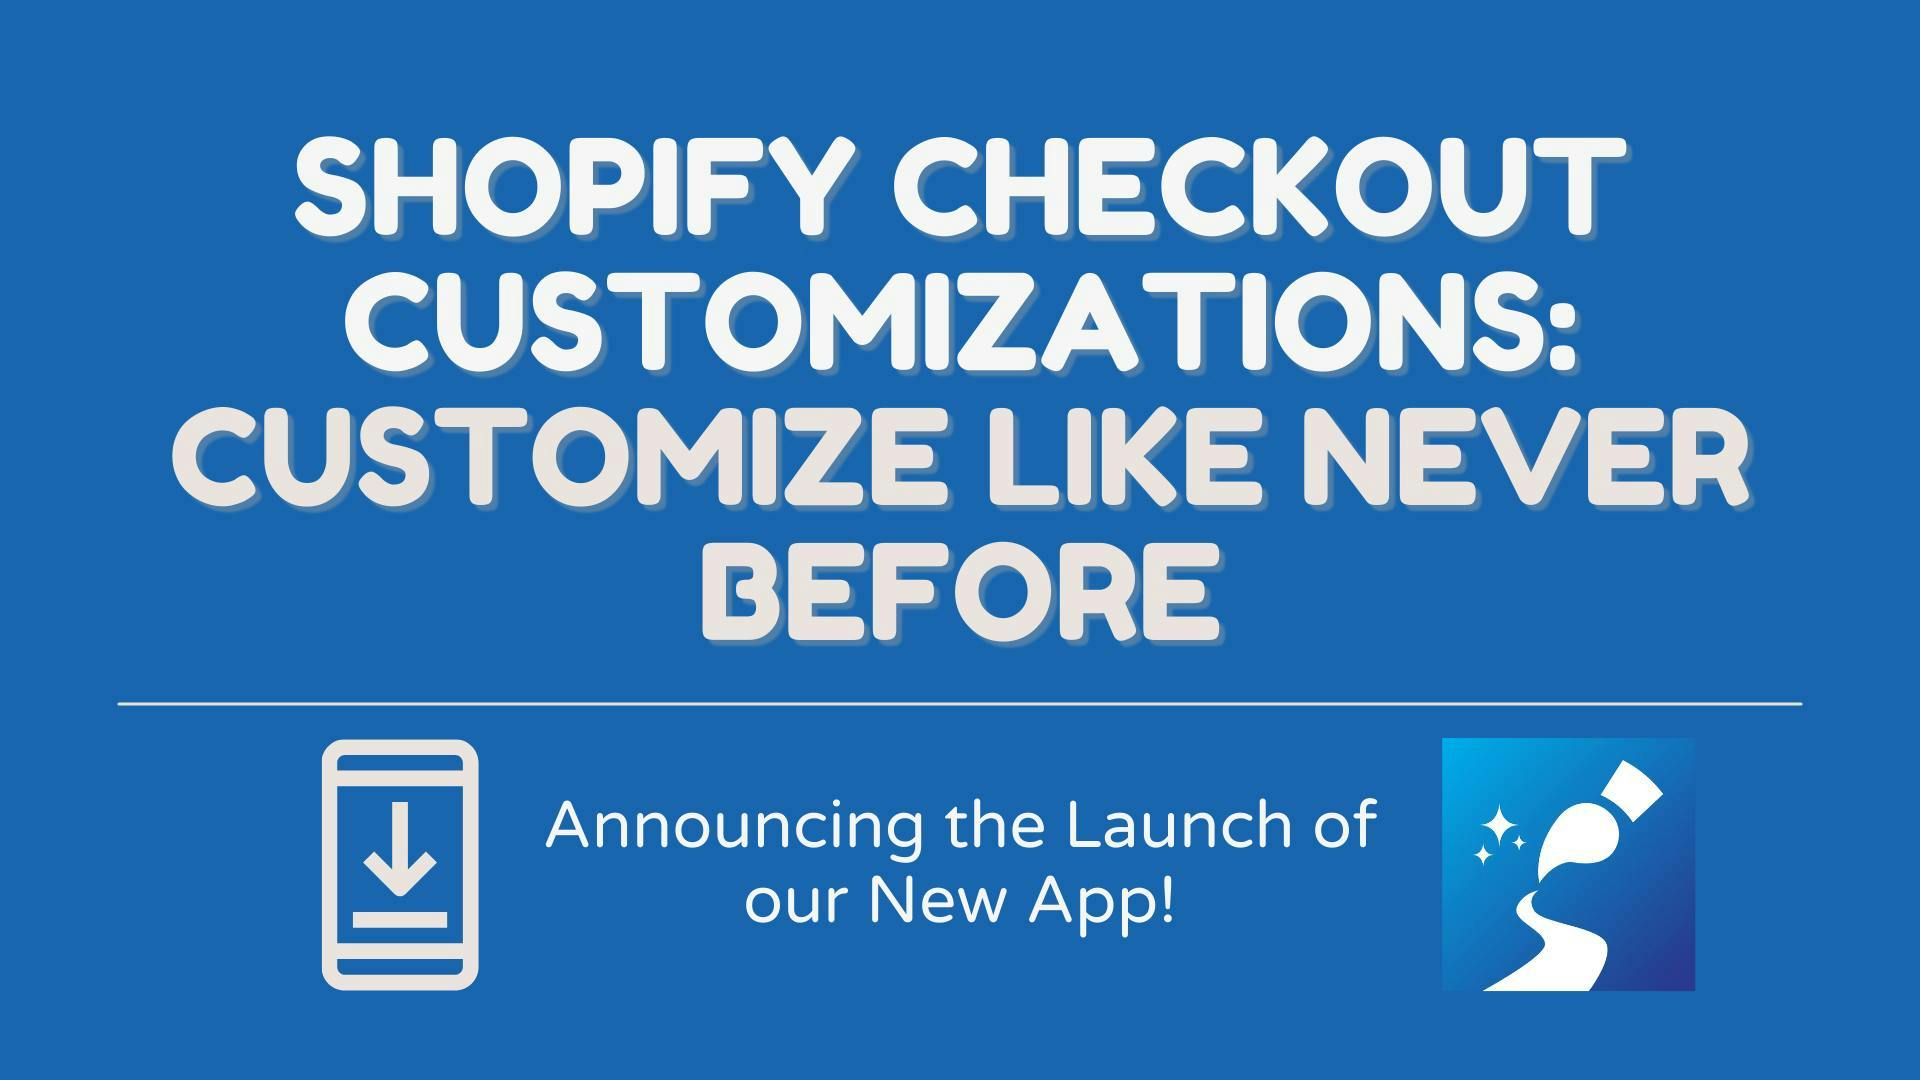 Shopify Checkout Customizations: Customize like never before - Announicng the Launch of our New App!